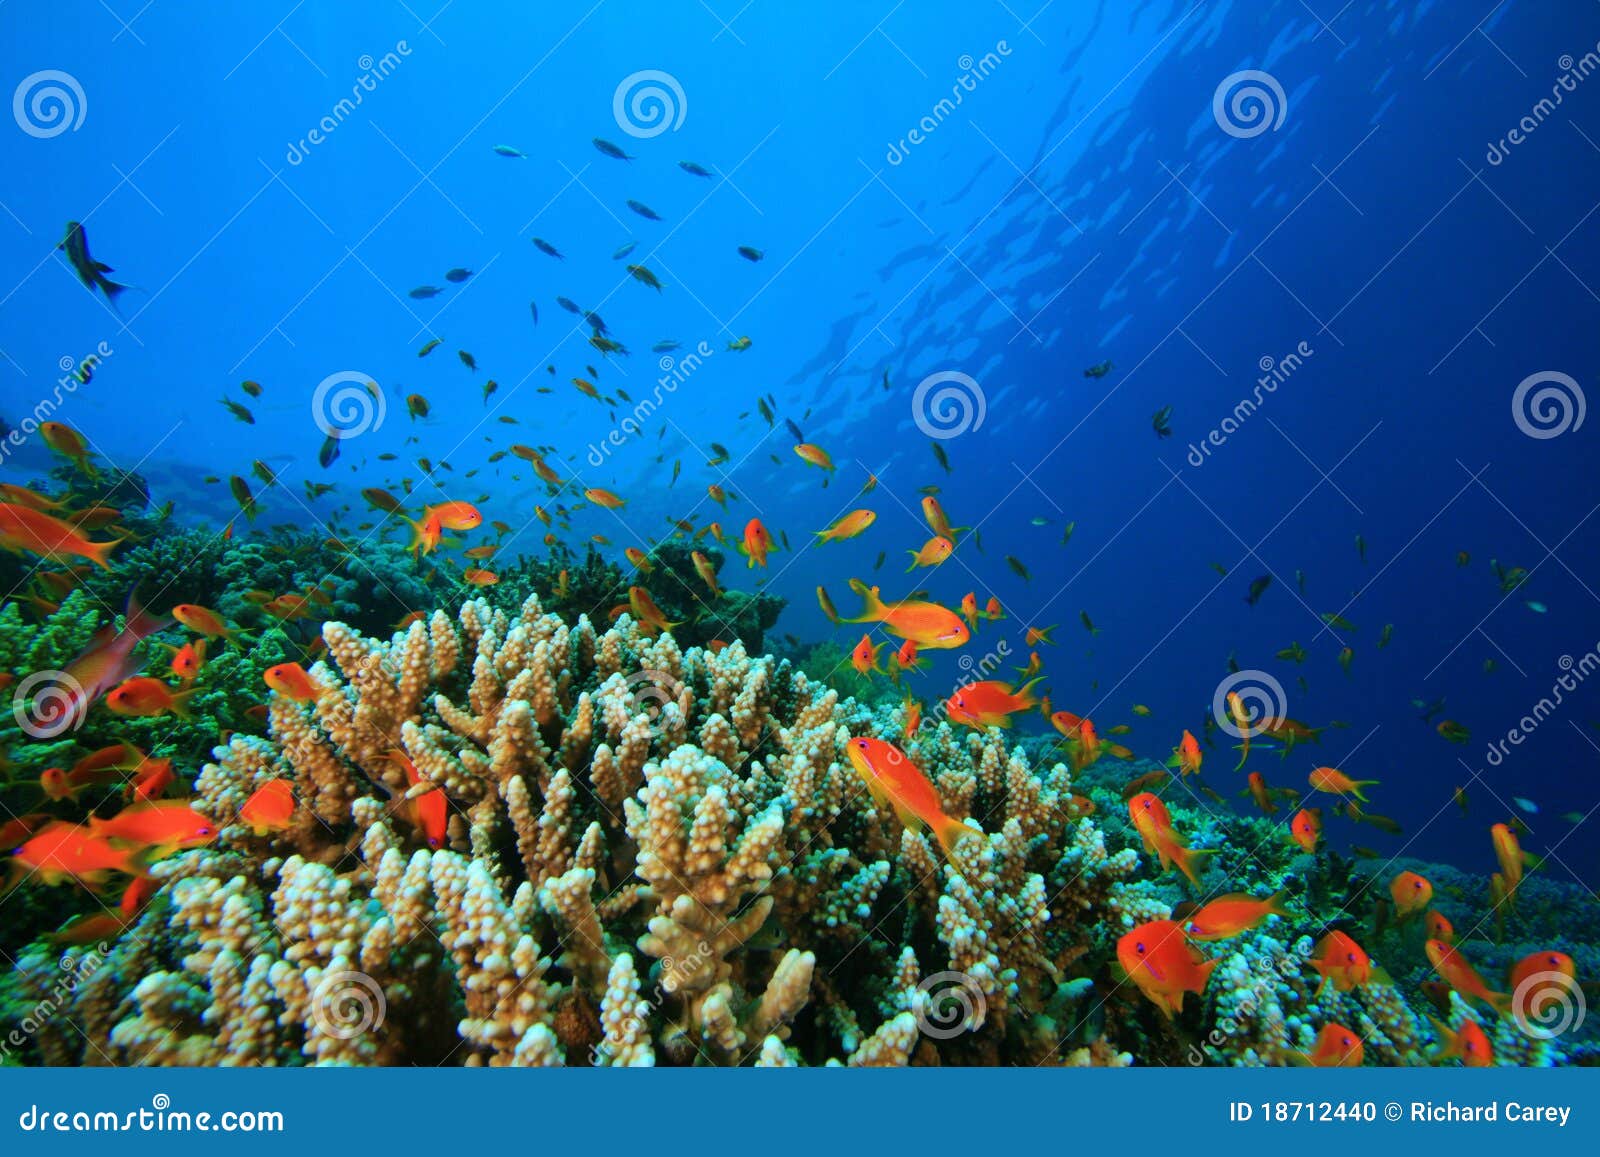 Tropical Fish and Coral Reef Stock Photo - Image of colorful, fish ...